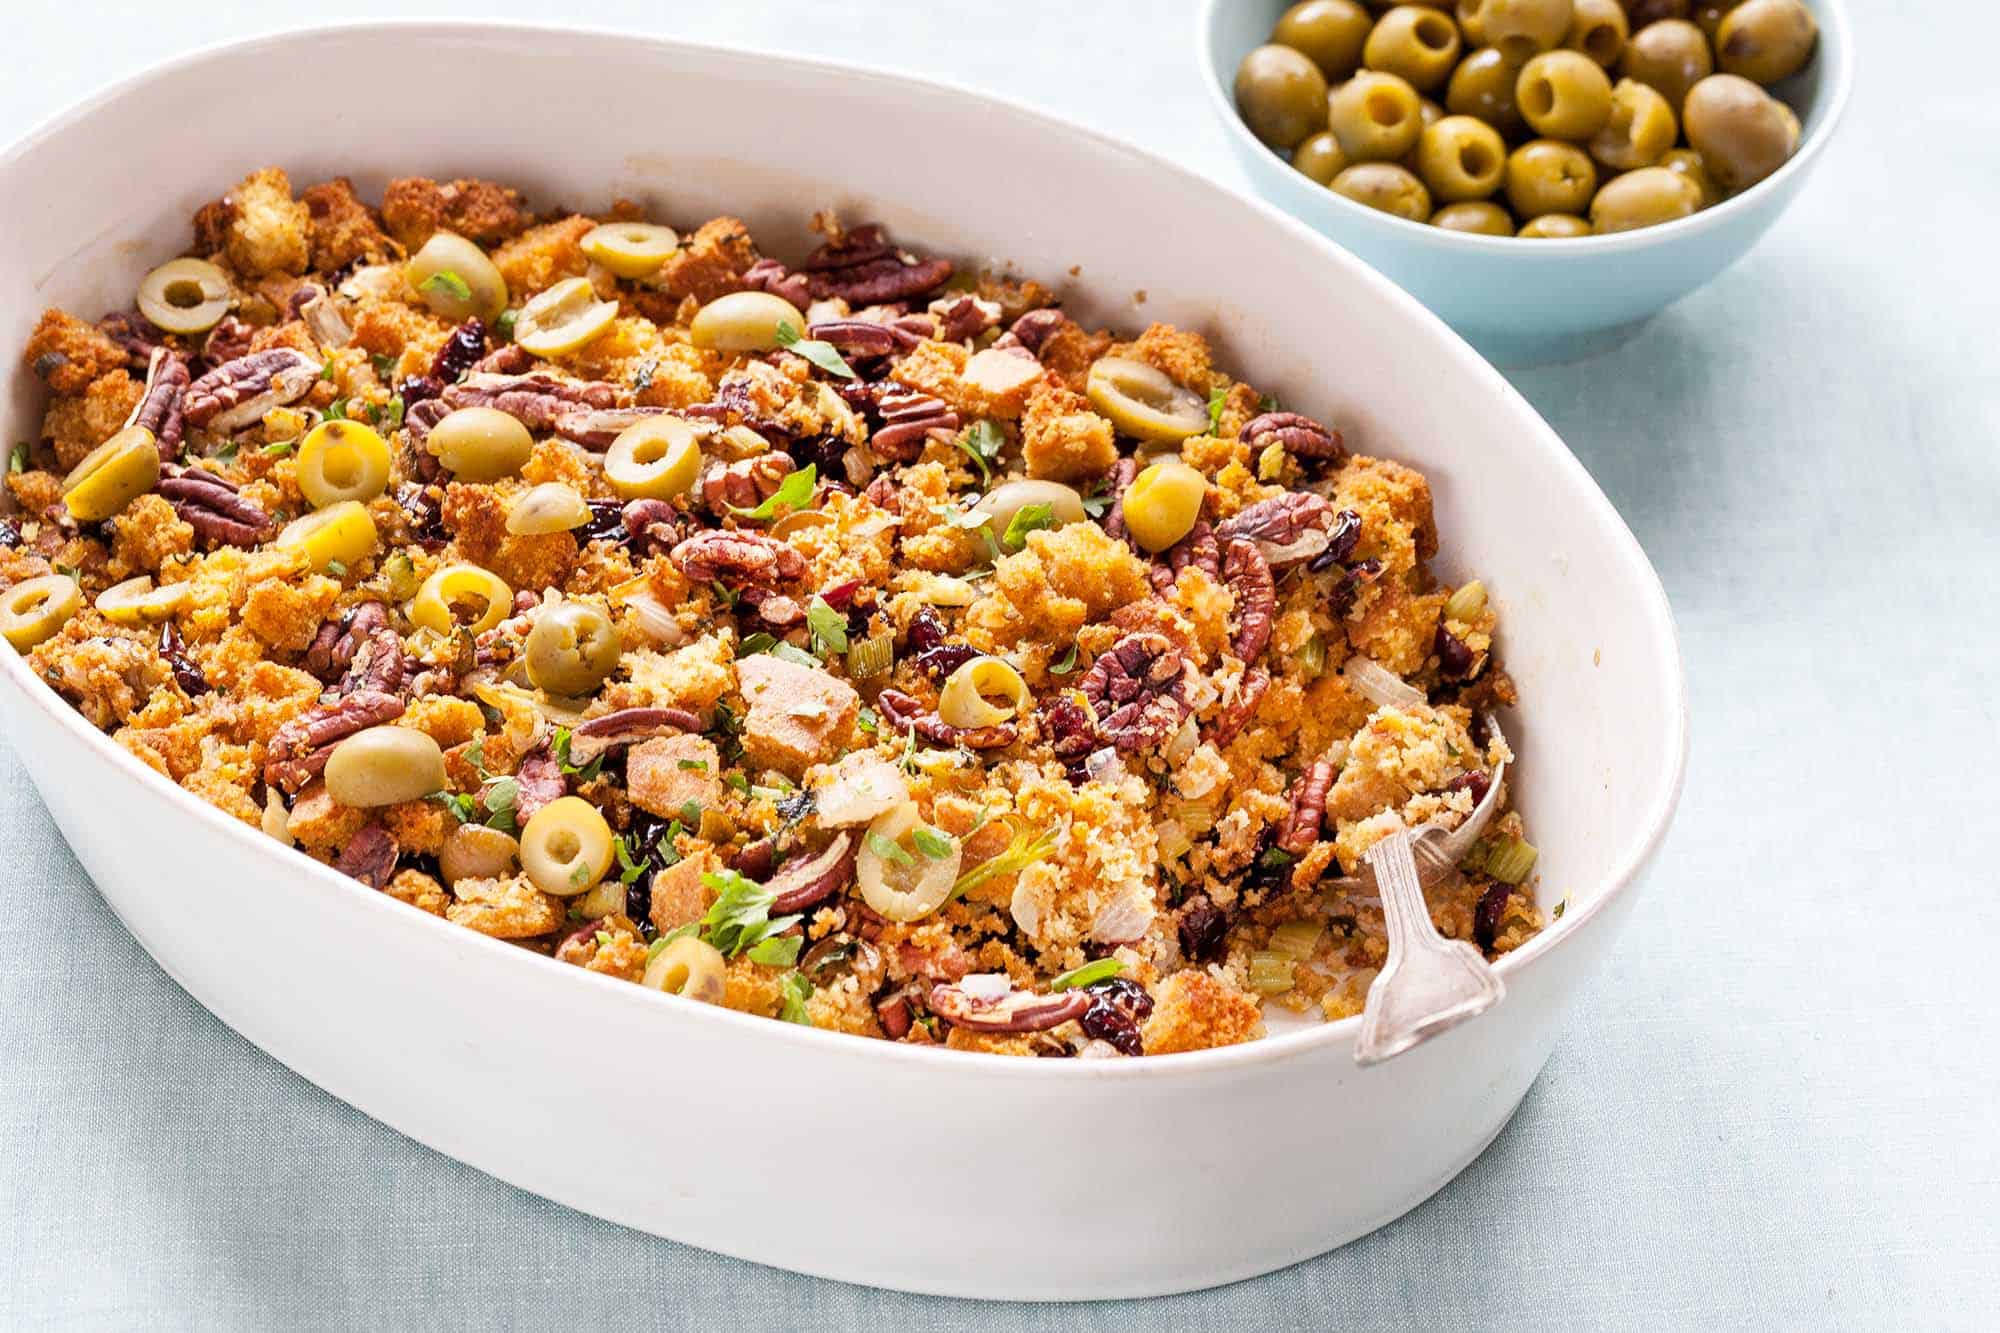 Cornbread stuffing with green olives and pecans